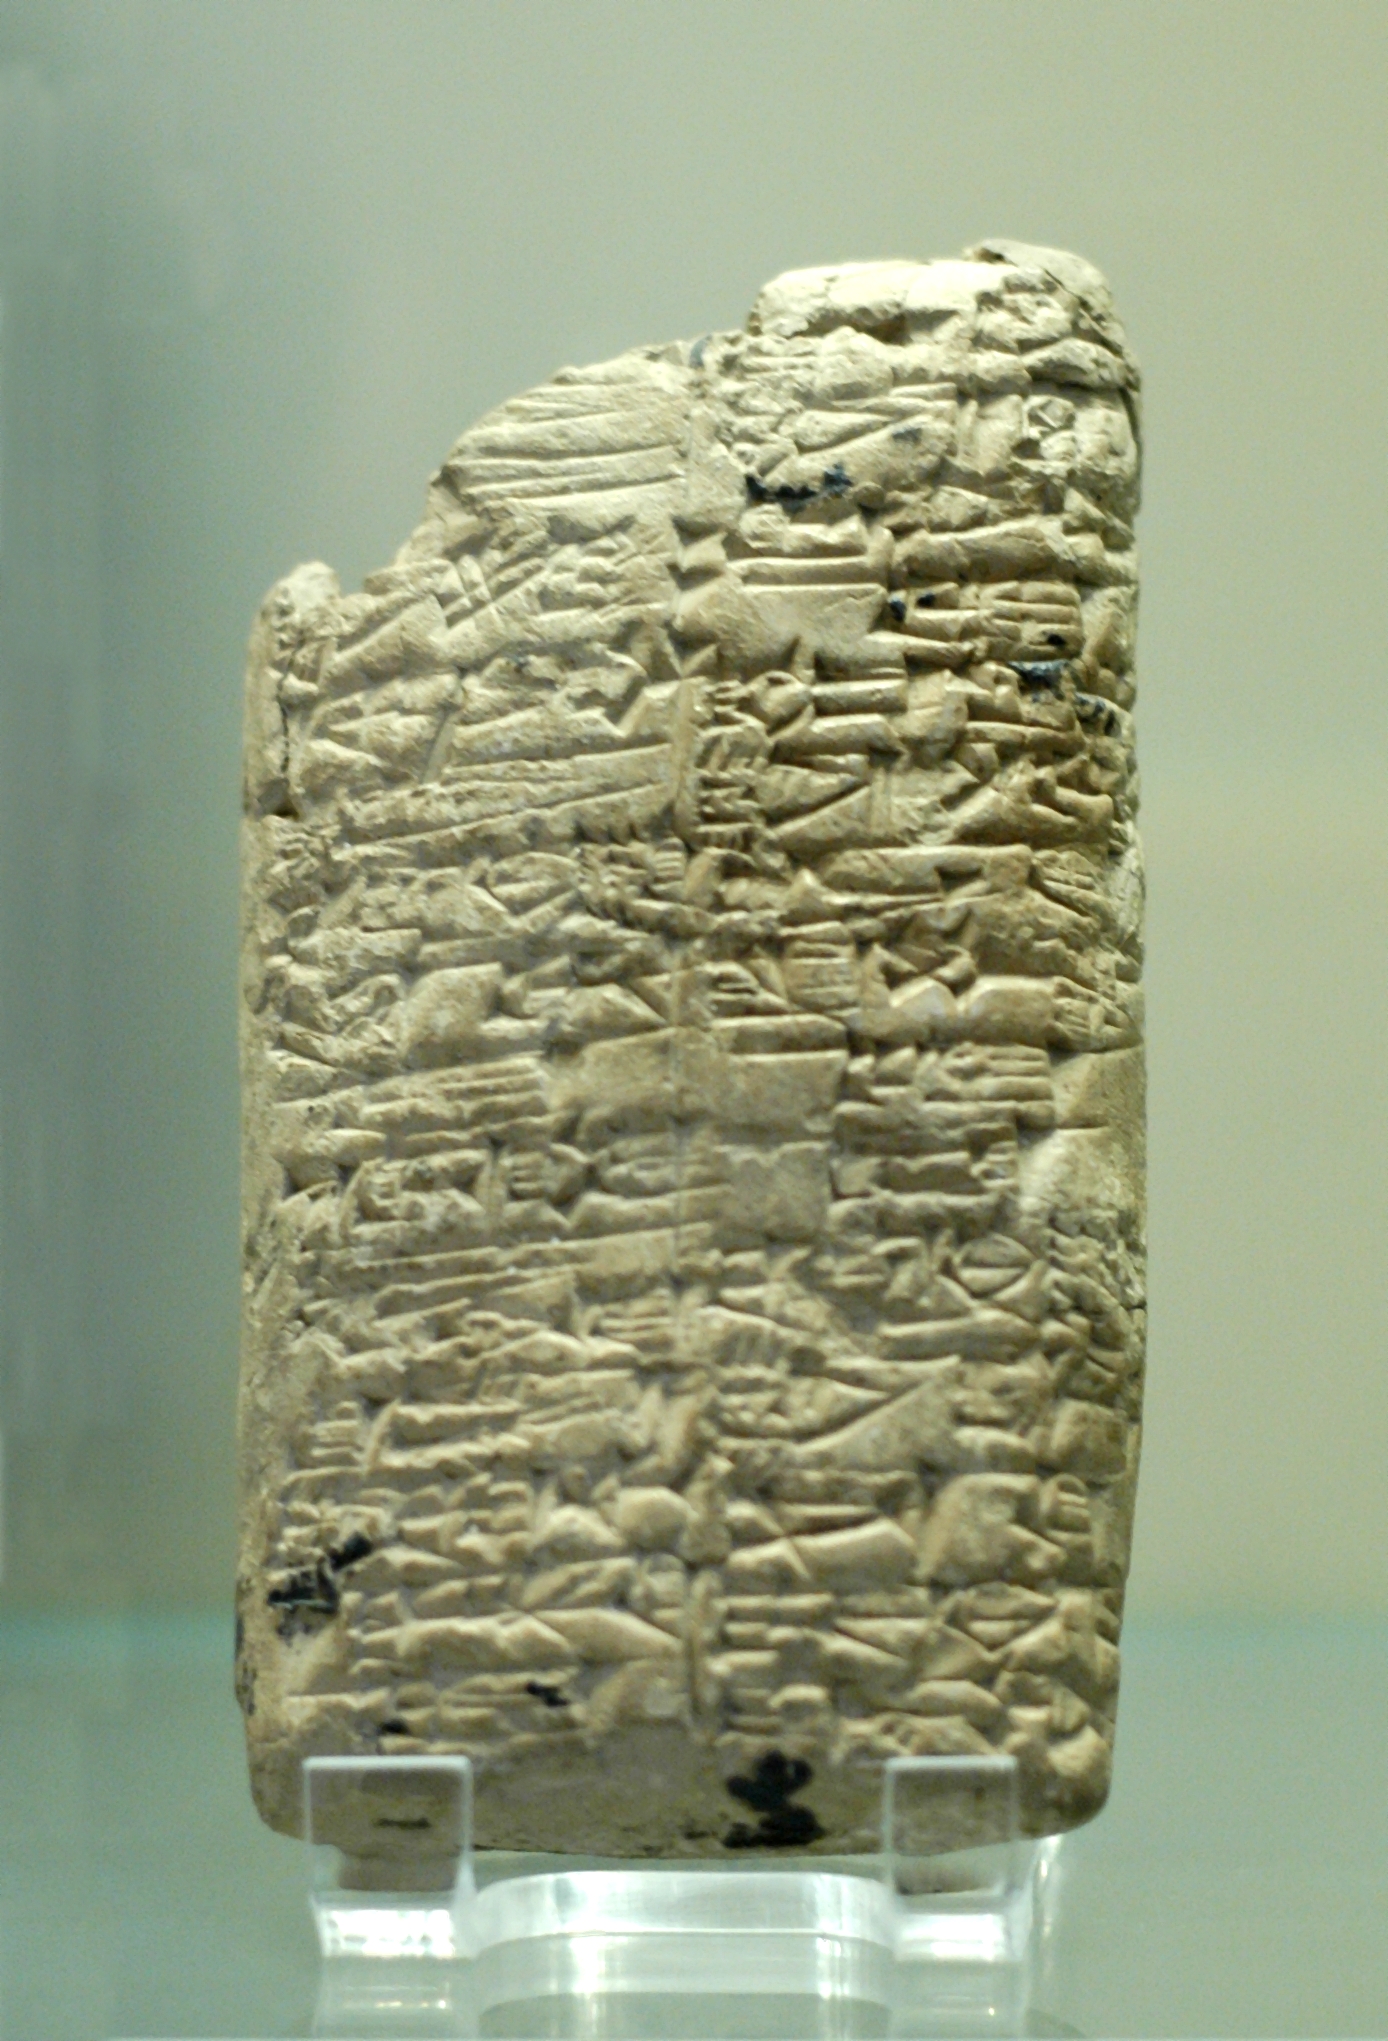 What were clay tablets used for